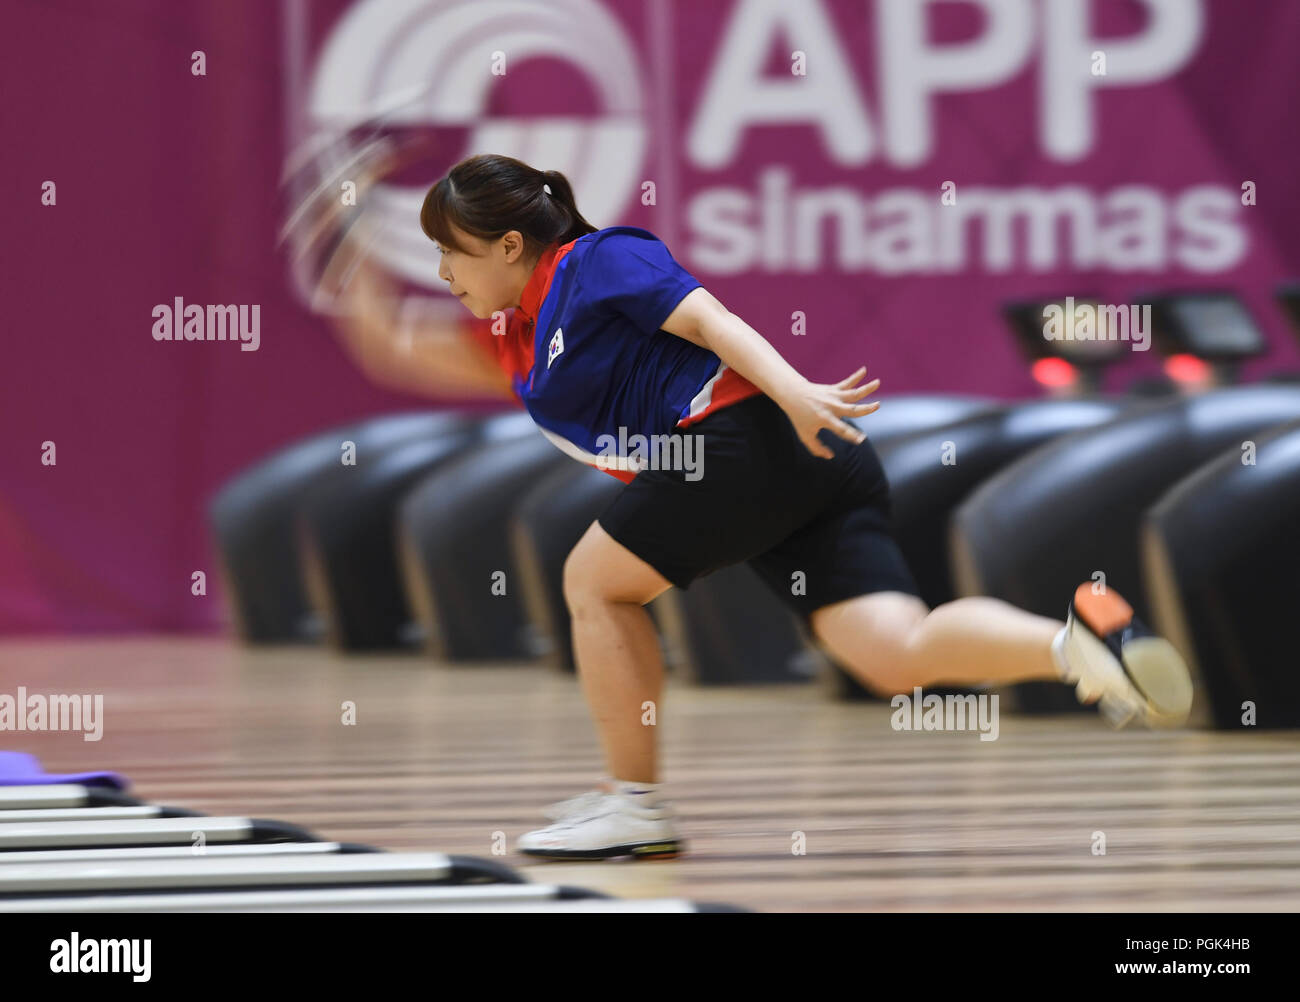 Palembang, Indonesia. 27th Aug, 2018. Lee Yeonji of South Korea competes during the Bowling Women's Masters final round at the 18th Asian Games in Palembang, Indonesia, Aug. 27, 2018. Credit: Liu Ailun/Xinhua/Alamy Live News Stock Photo